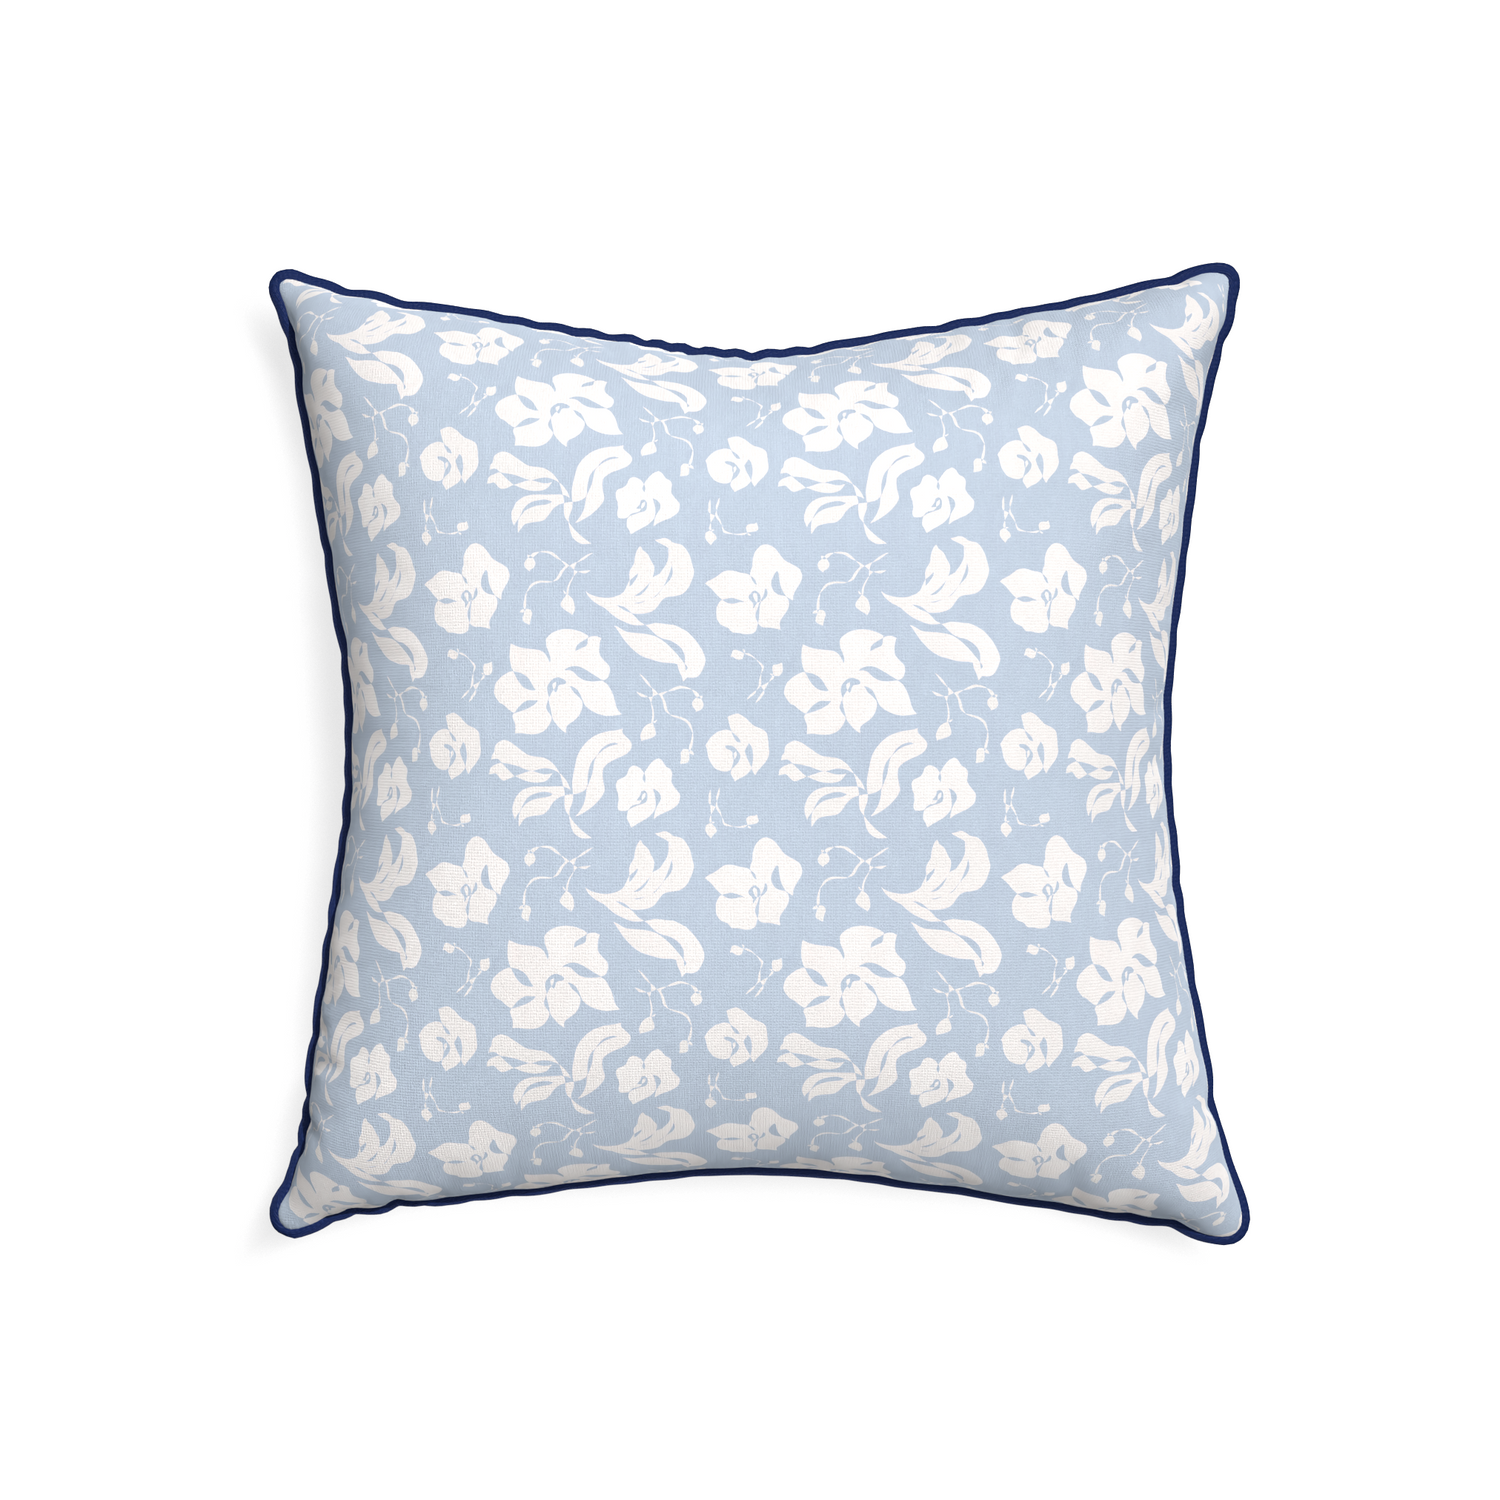 22-square georgia custom cornflower blue floralpillow with midnight piping on white background